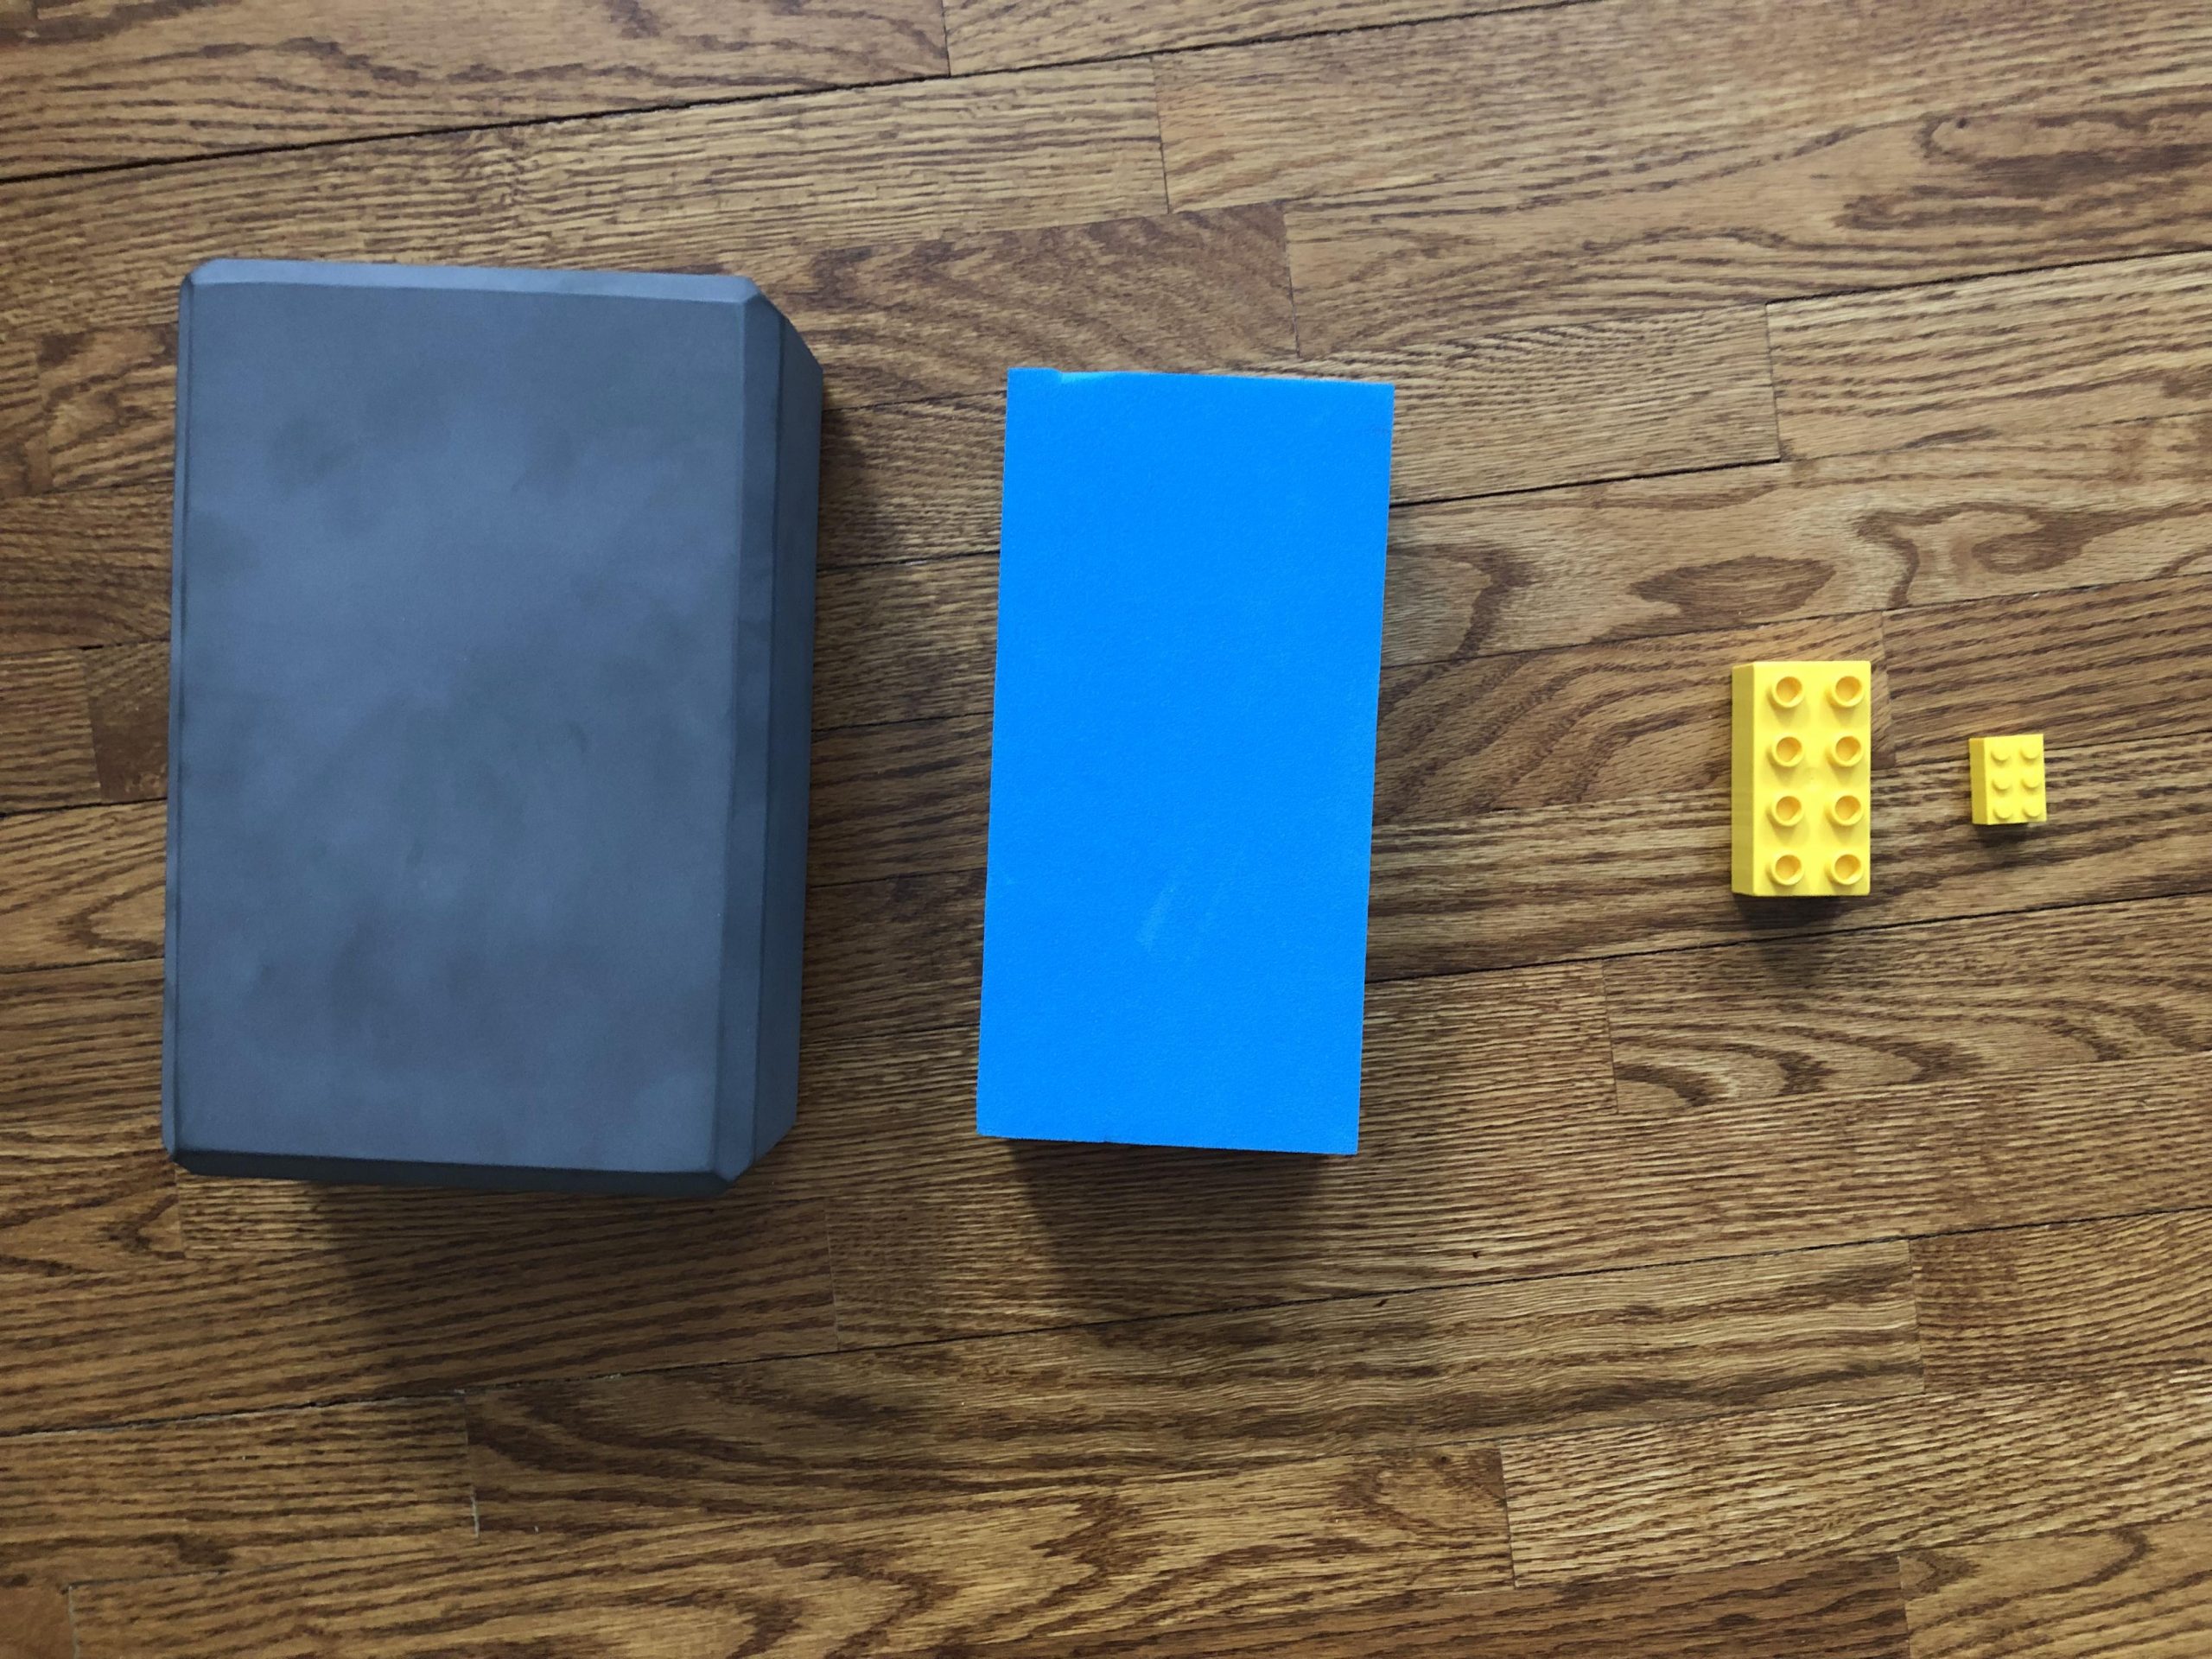 Photo of four blocks on a wooden floor. Two are large foam blocks, a grey one slightly larger than a blue one. Two are small yellow Lego blocks, one smaller than the other.